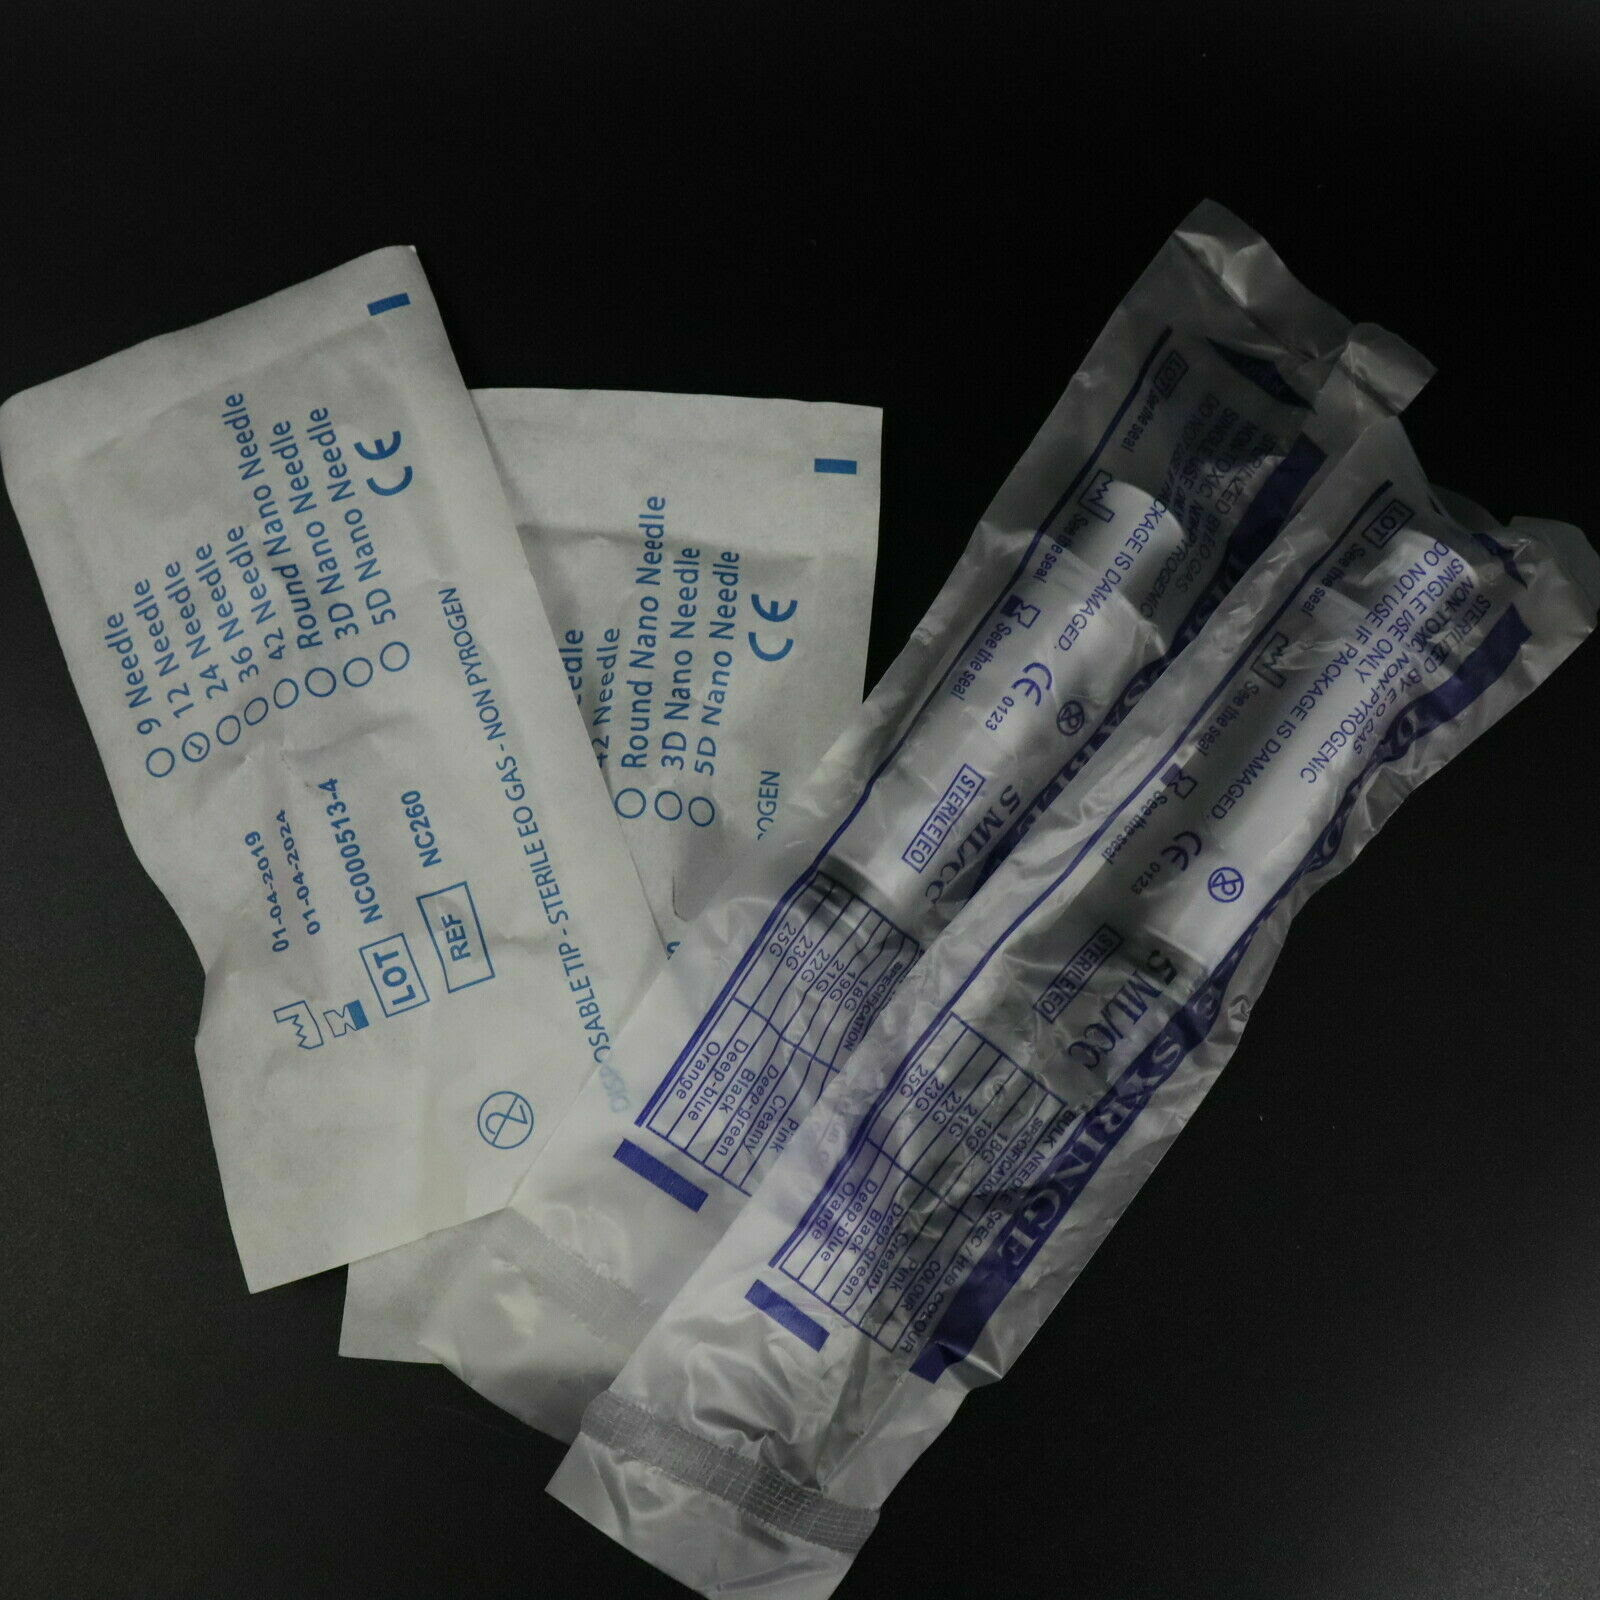 Replacement syringe with needle